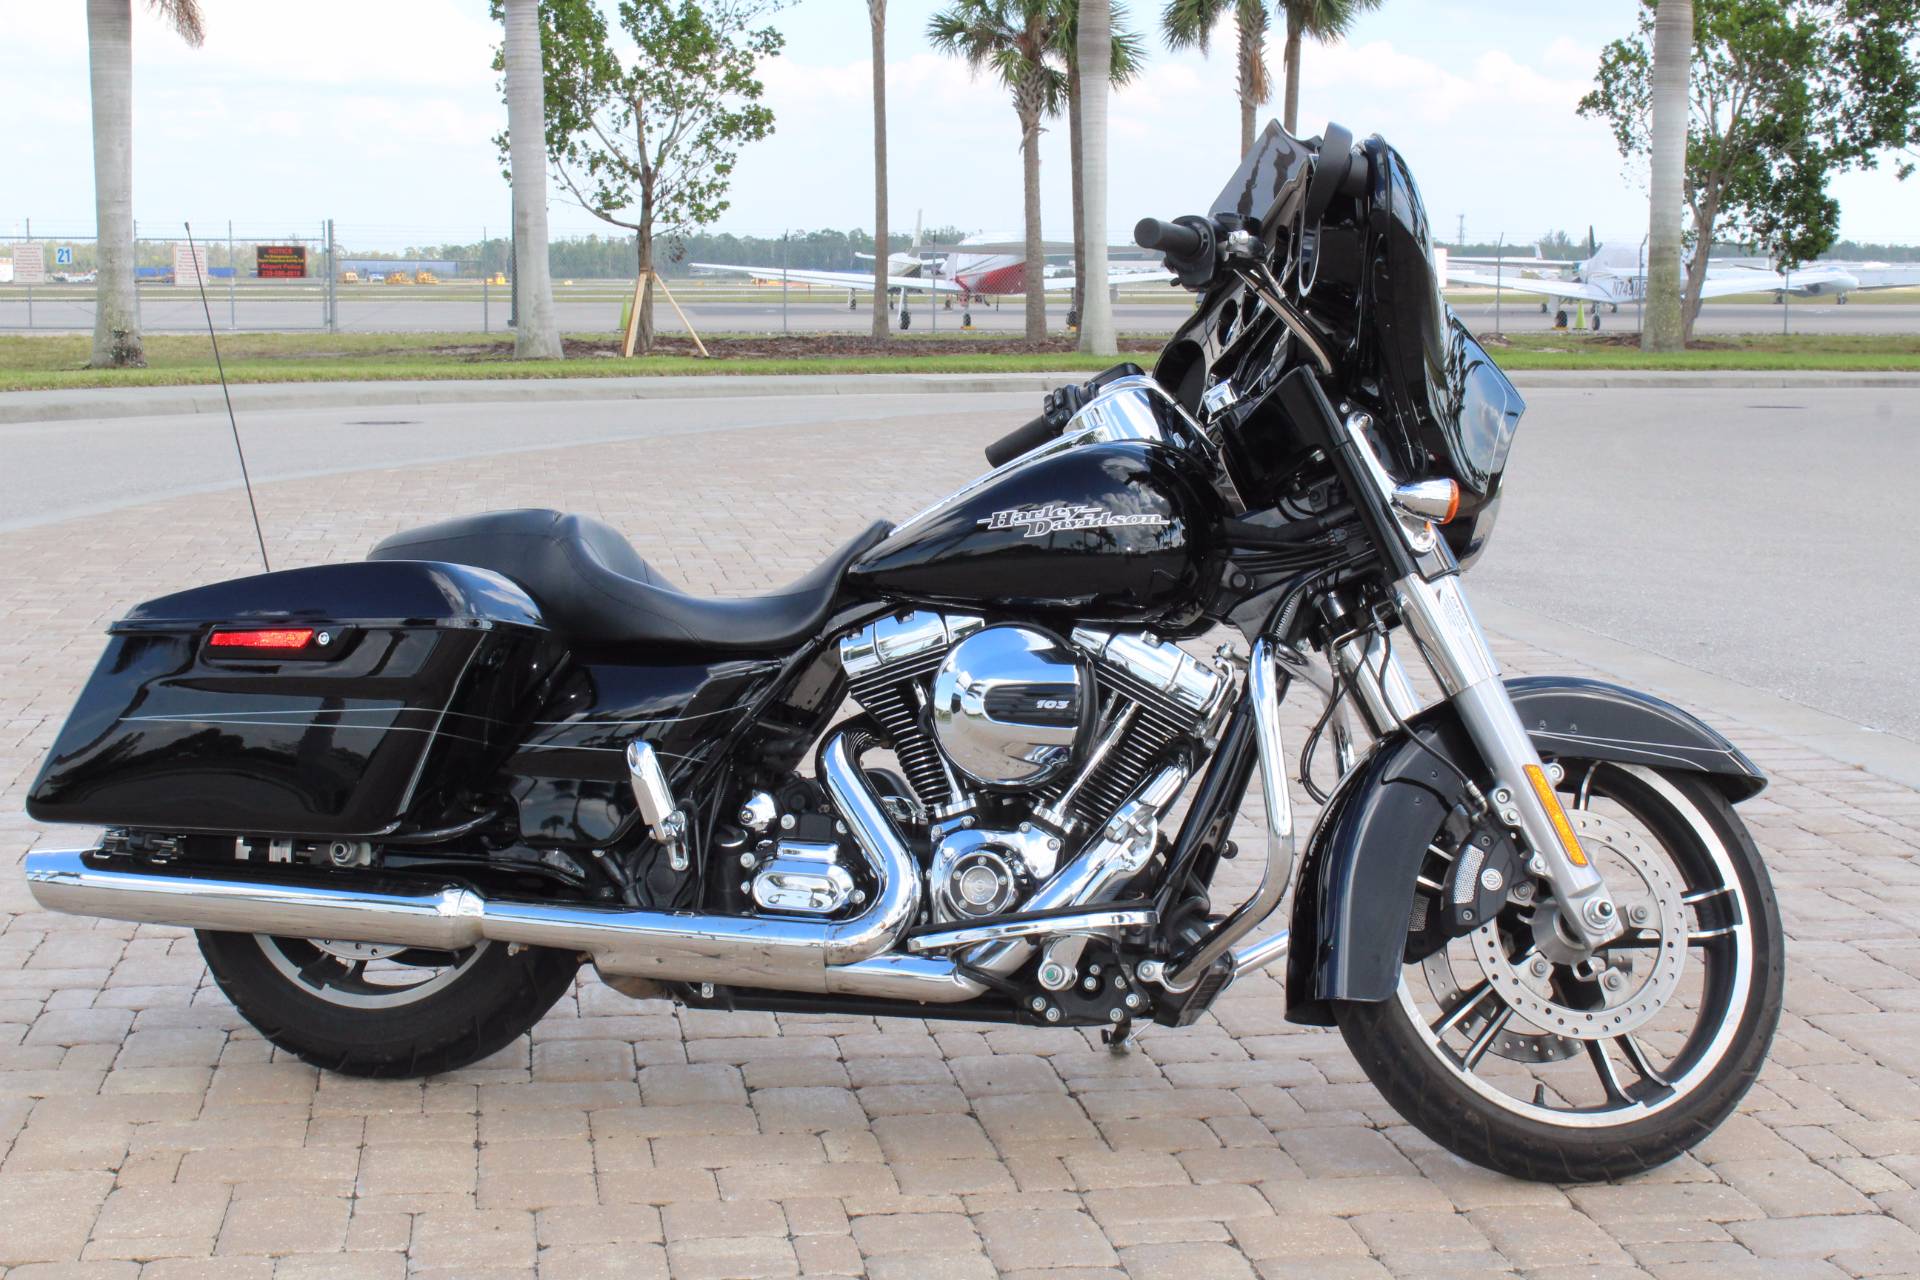 Used 2016 Harley Davidson Street Glide Motorcycles In Fort Myers Fl Stock Number Gb675597